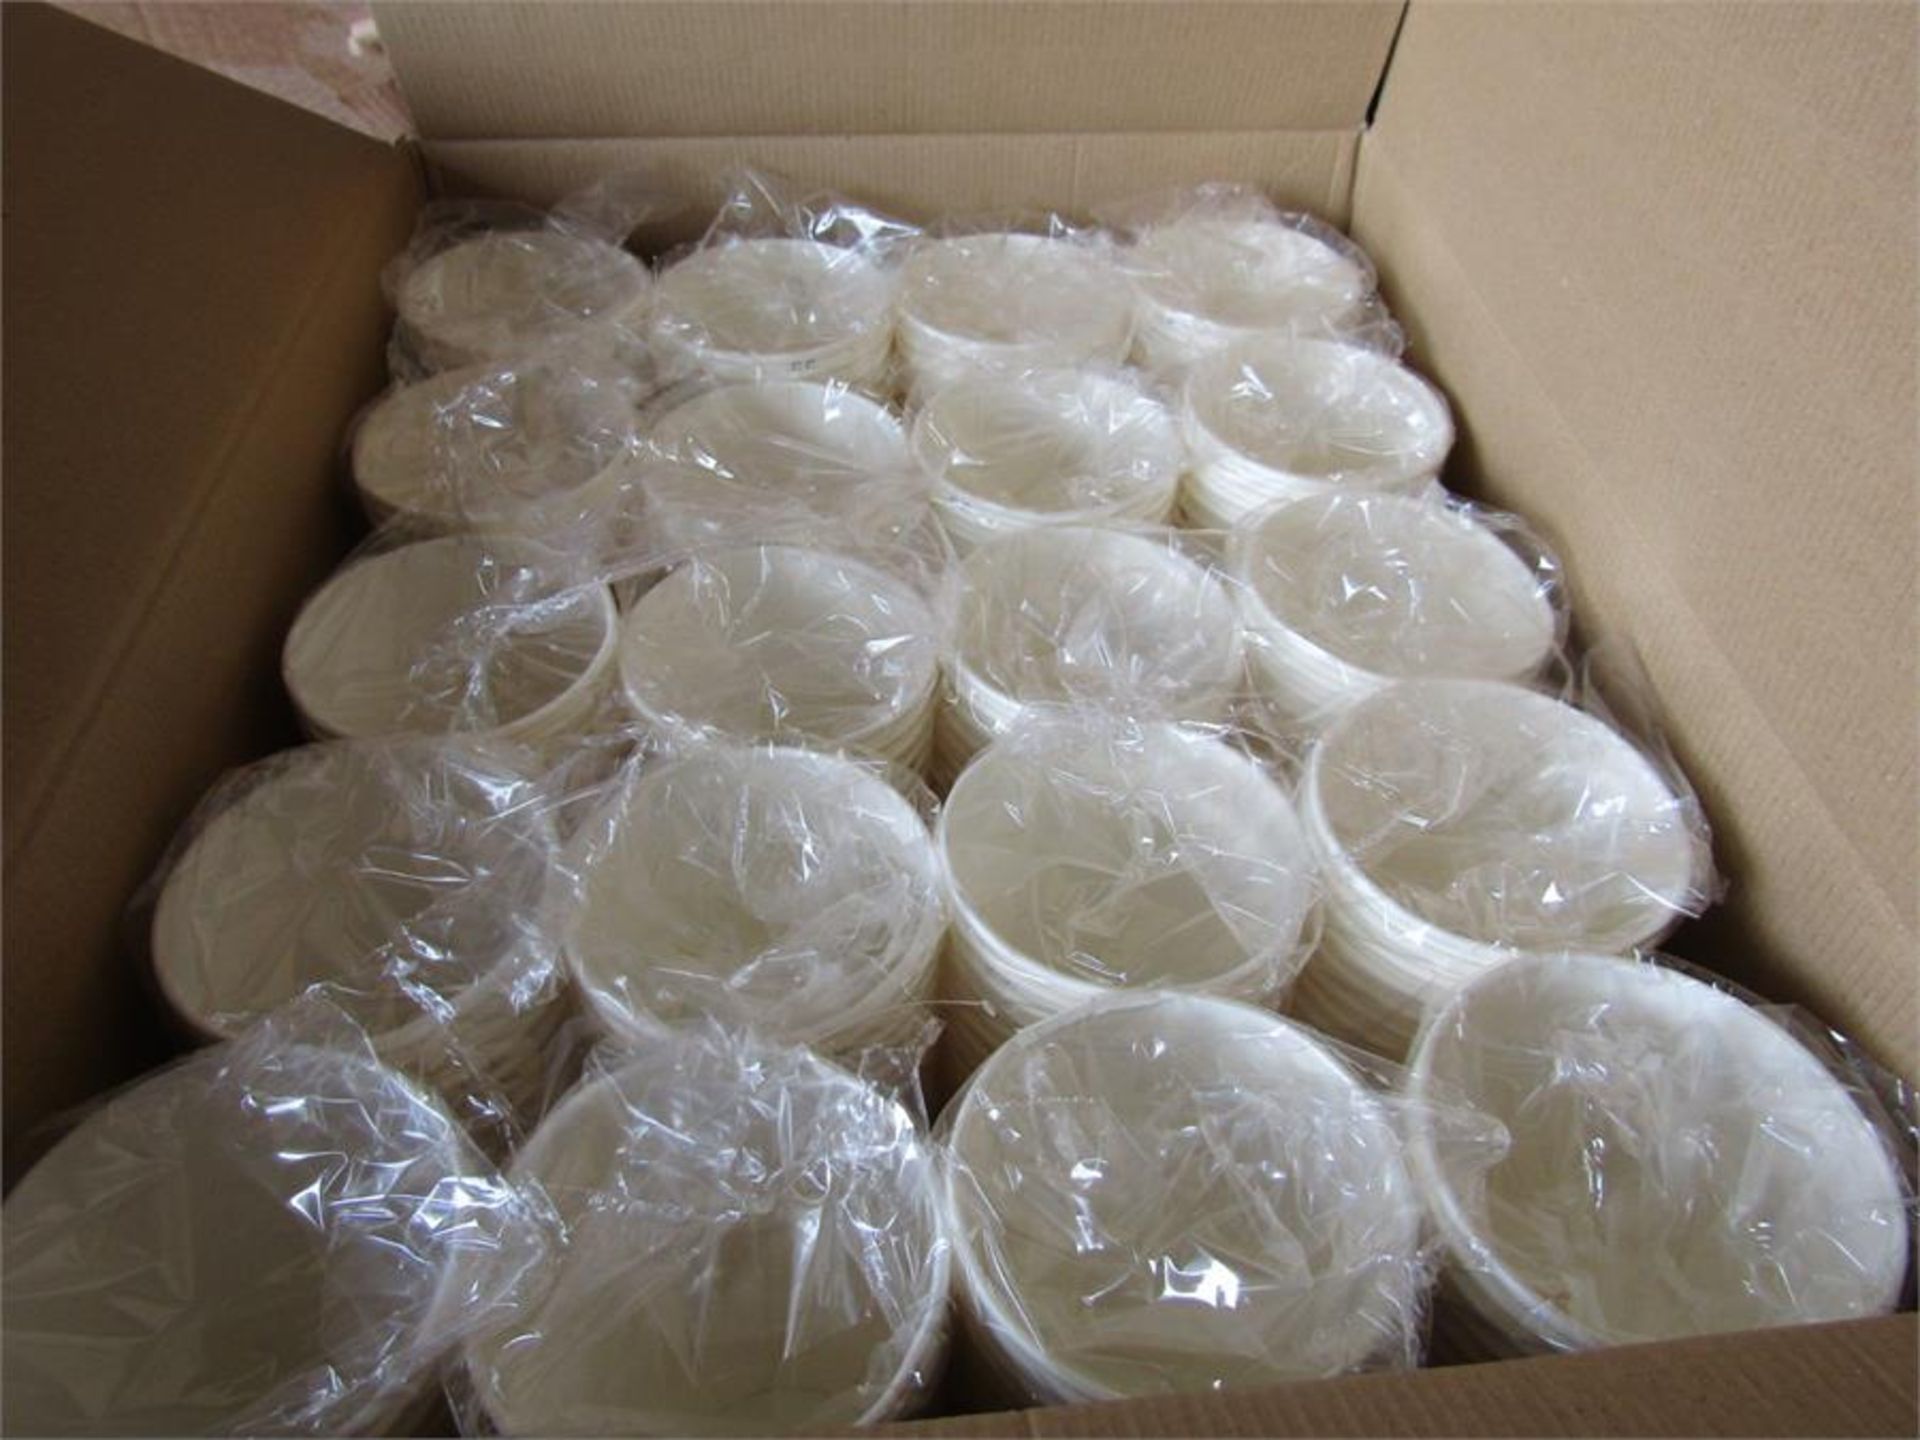 Box of 1000 x 600ml Cardboard Measuring Cups - Paint Measure - TCB-1000 164366 - Image 2 of 4